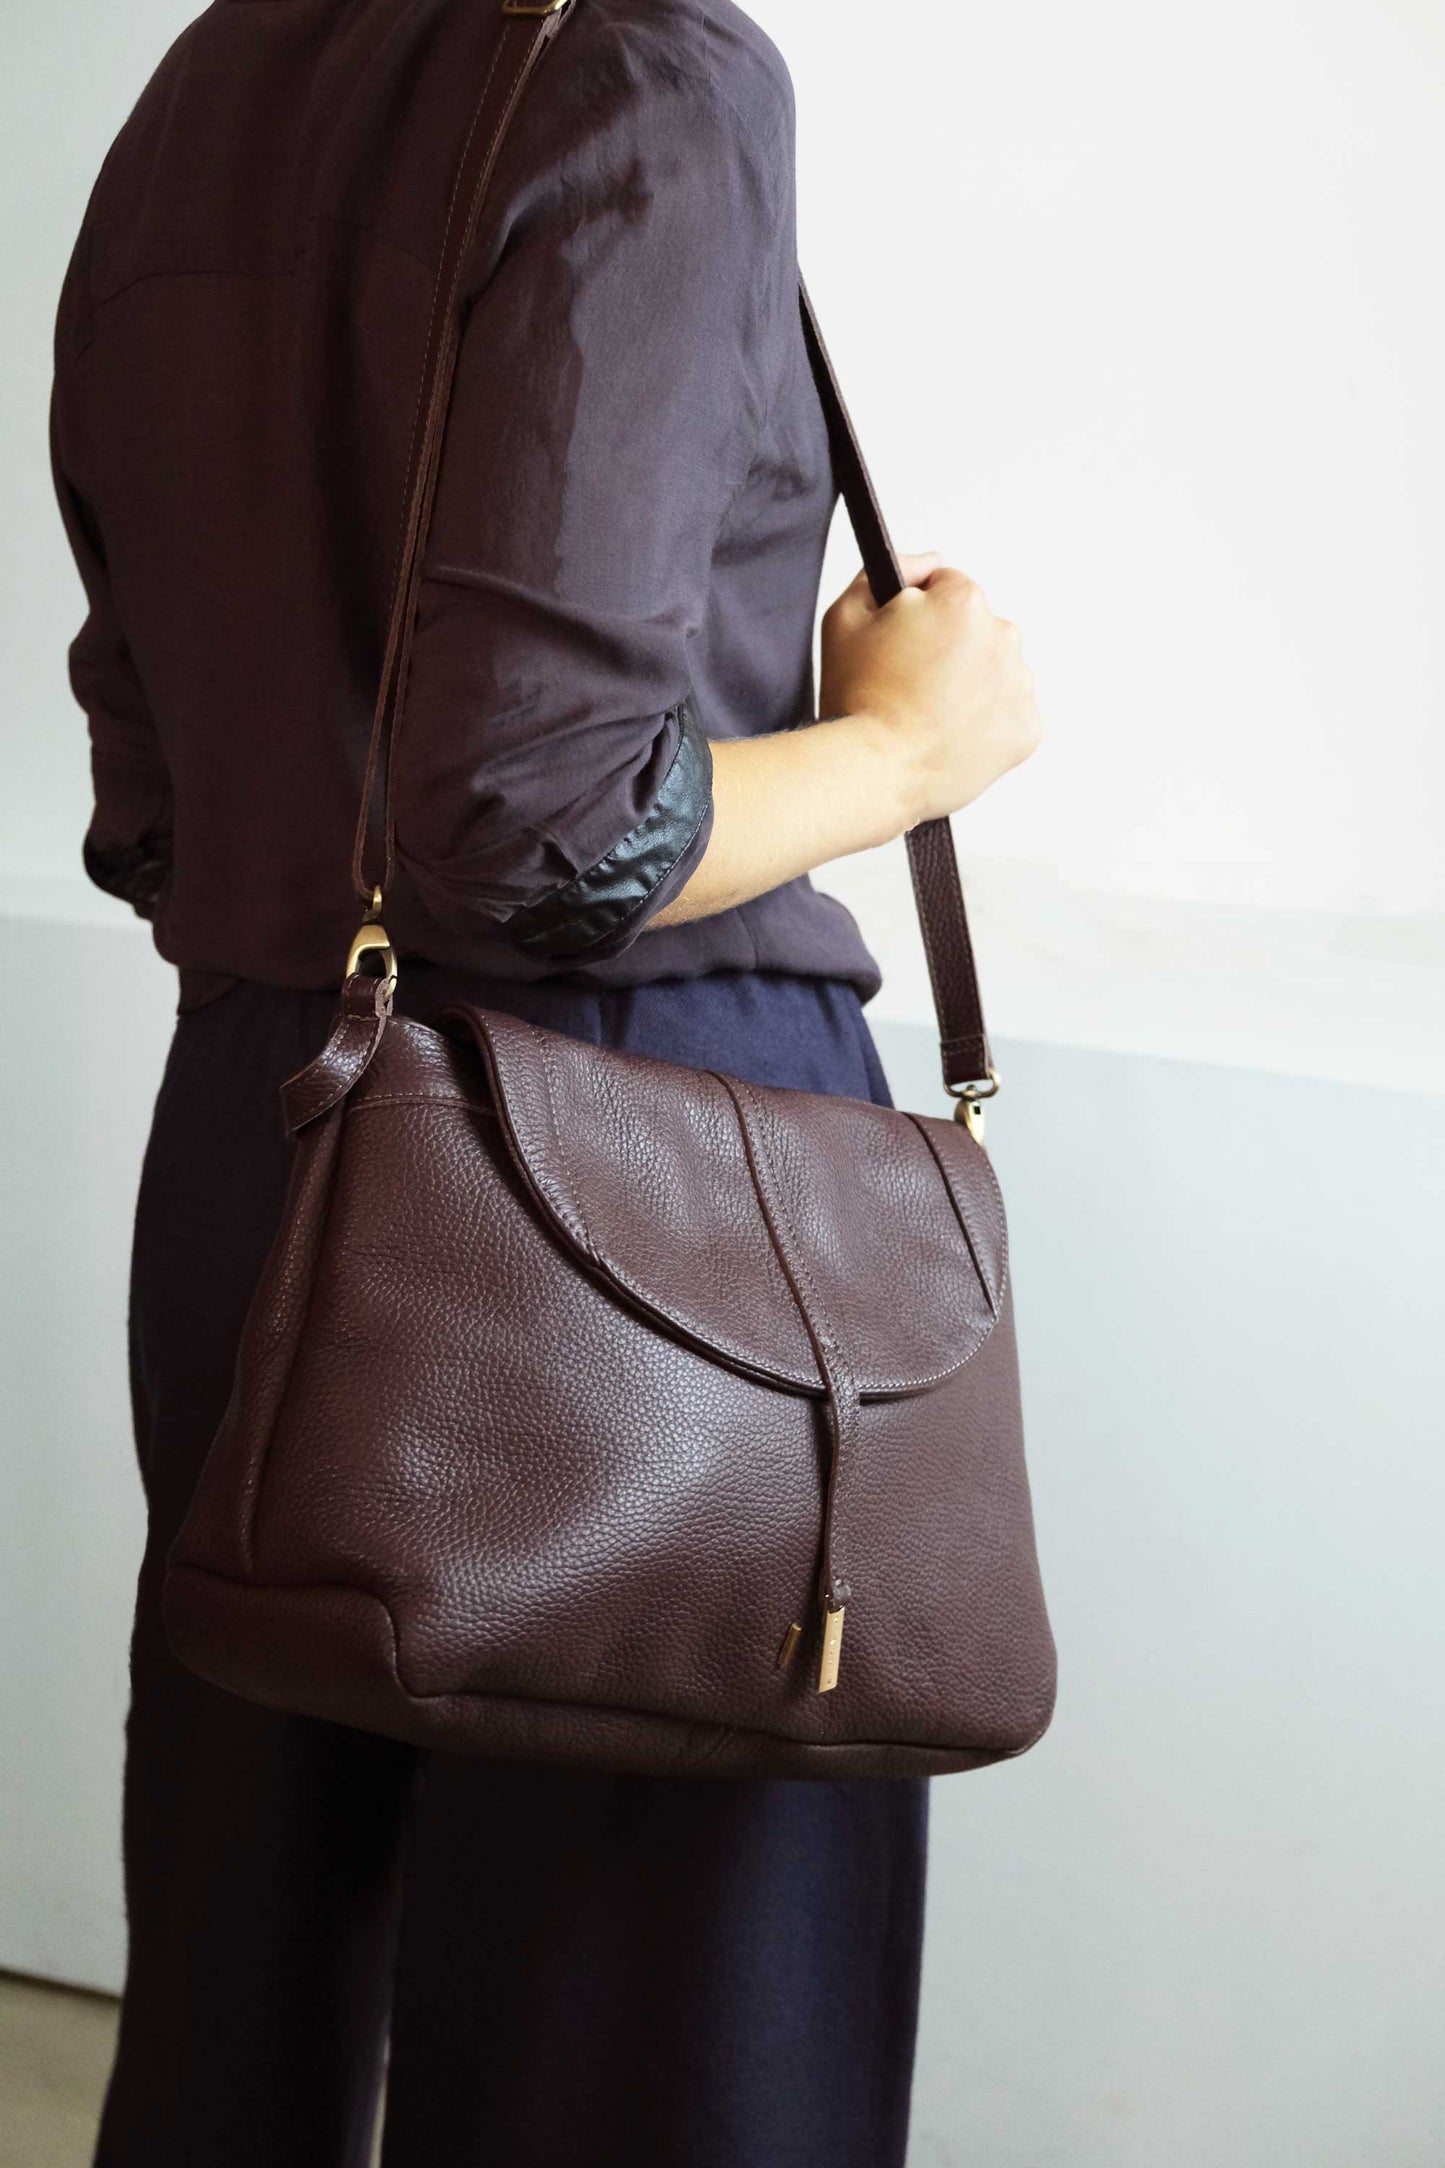 Do Torchon saddle bag in leather with natural grain